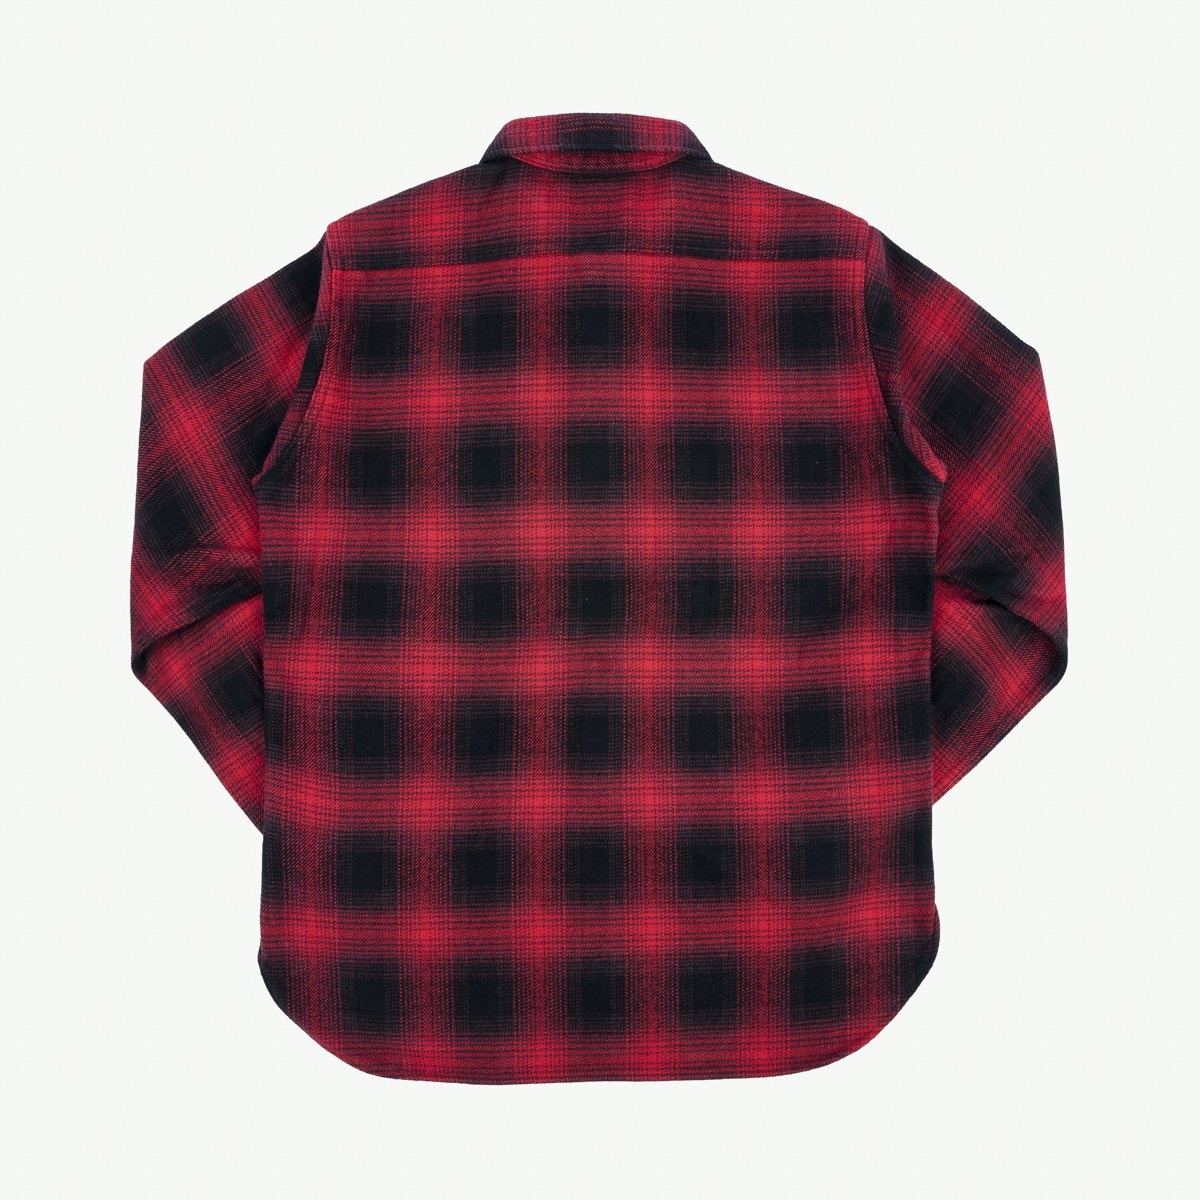 IHSH-265-RED Ultra Heavy Flannel Ombré Check Work Shirt - Red/Black - 5